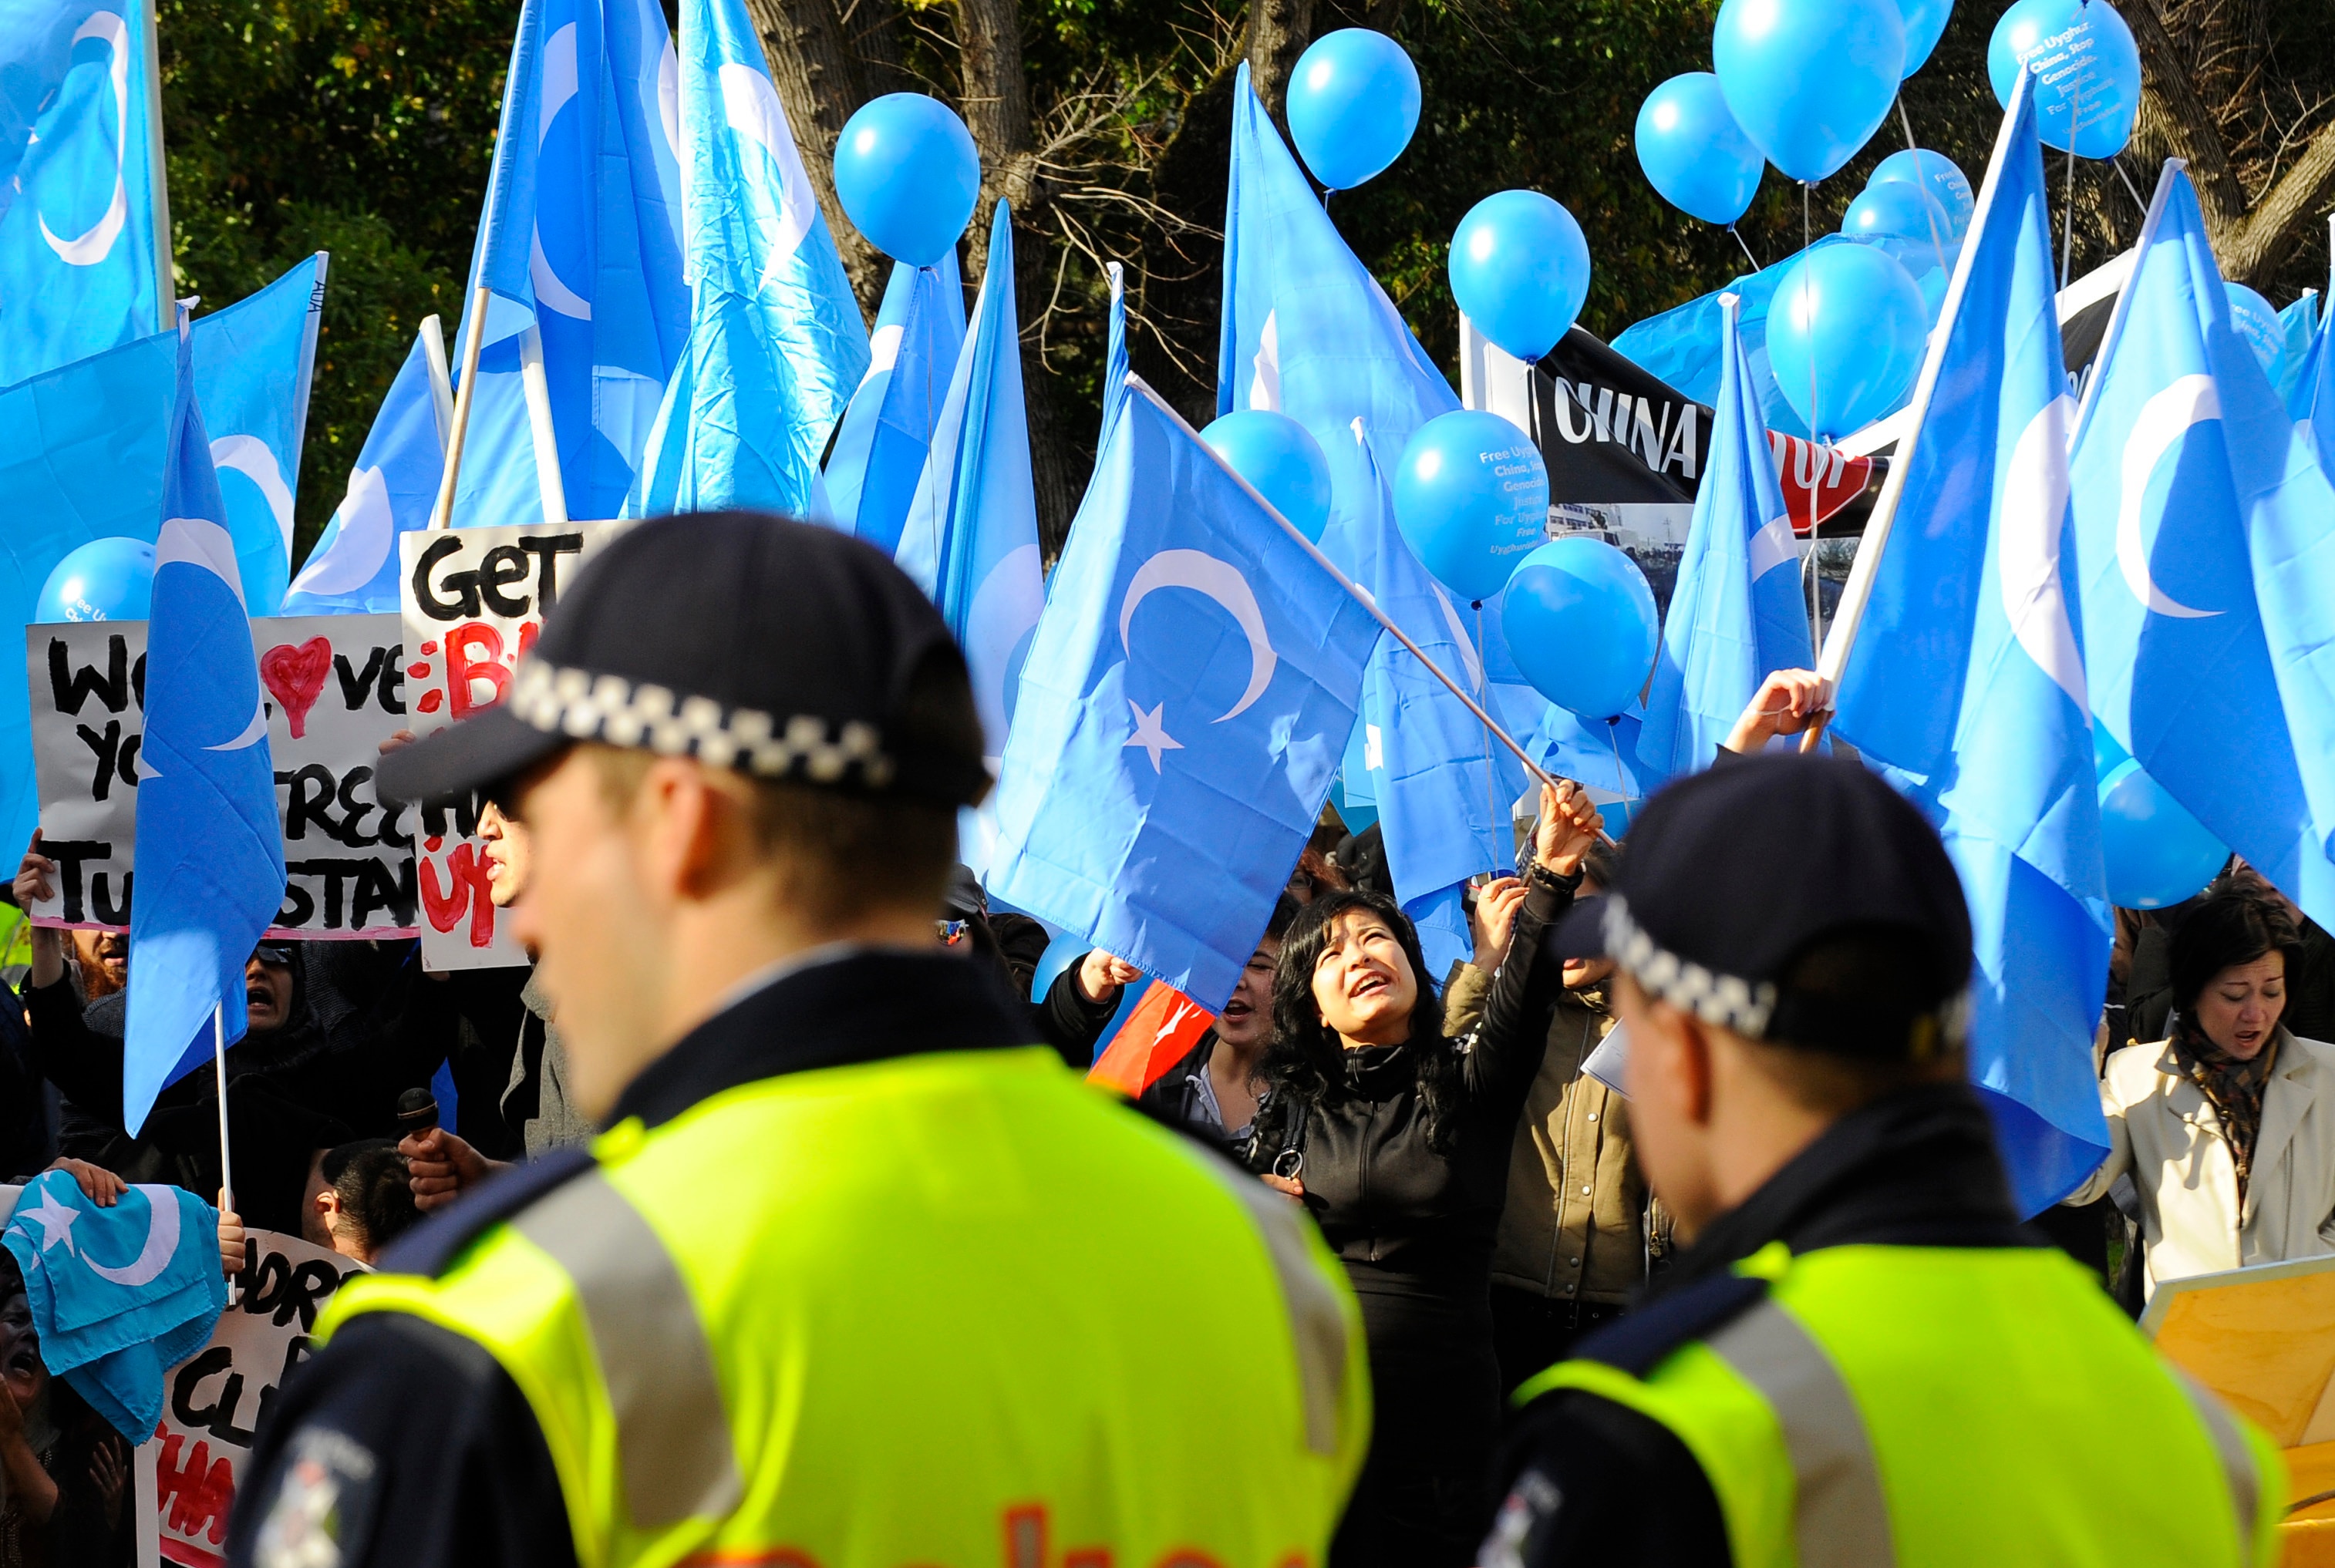 Uighur Australians are concerned about the persecution of their people back in China.